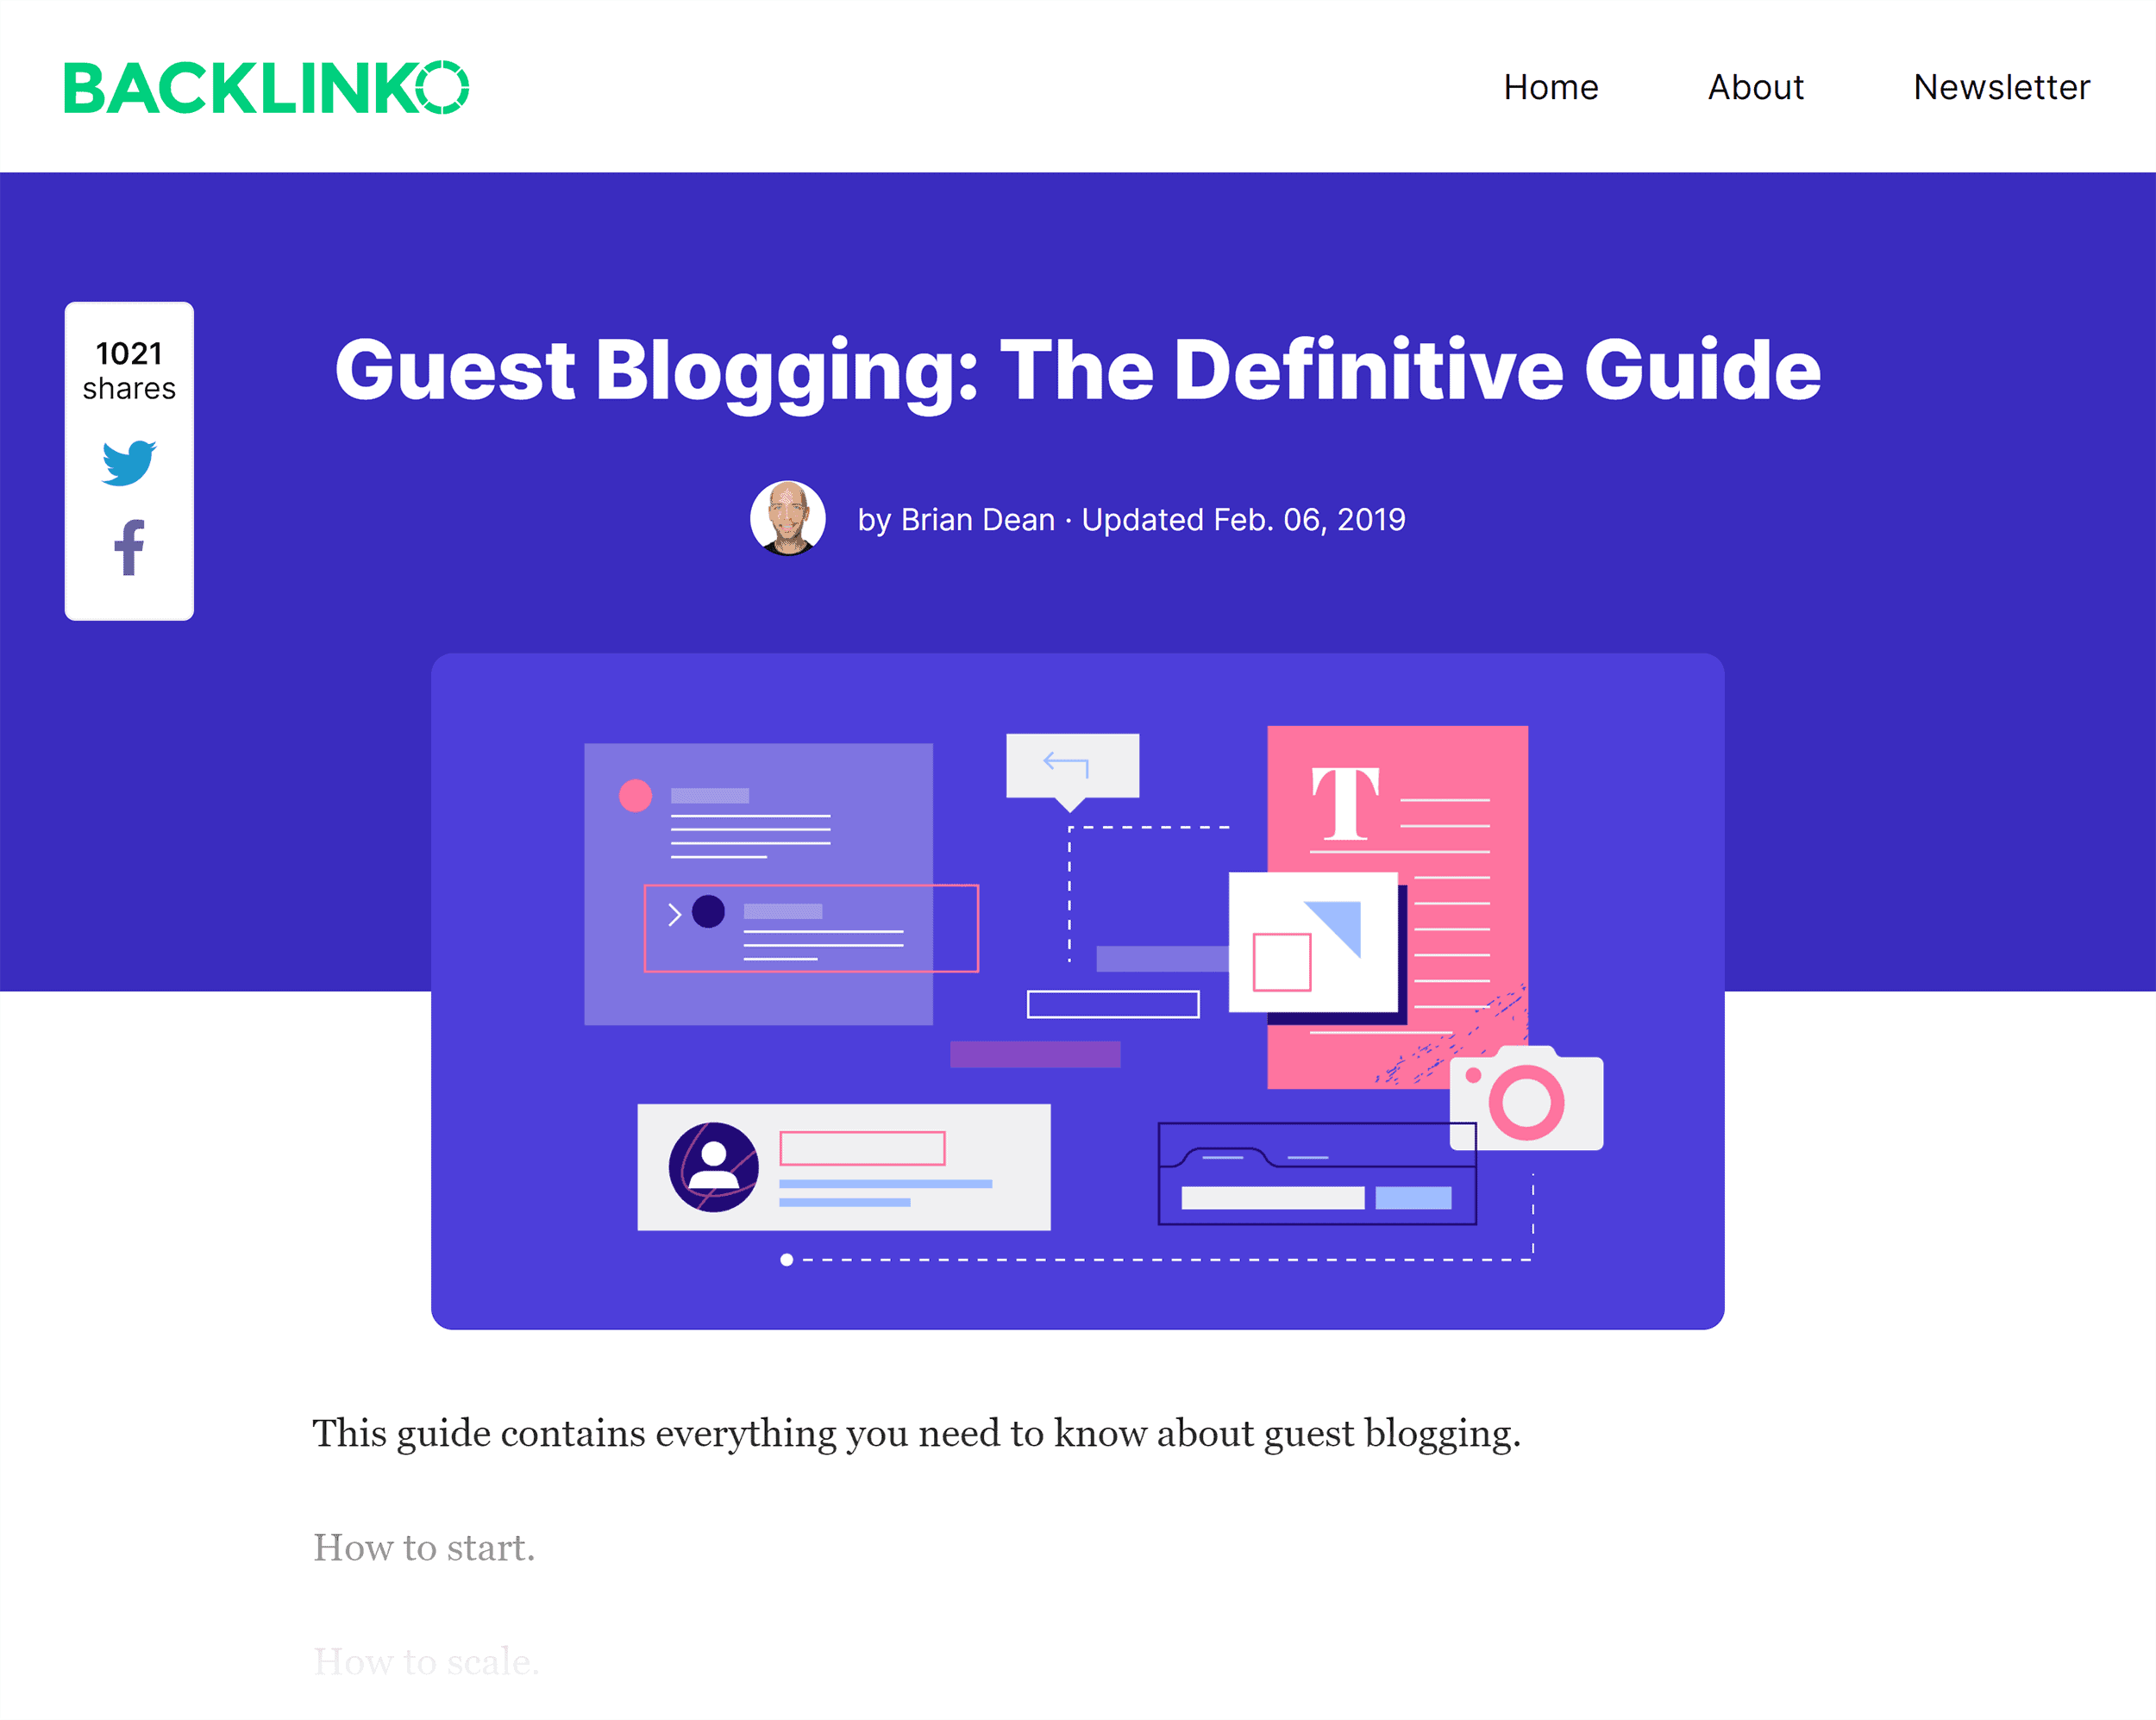 Backlinko – The definitive guide to guest blogging